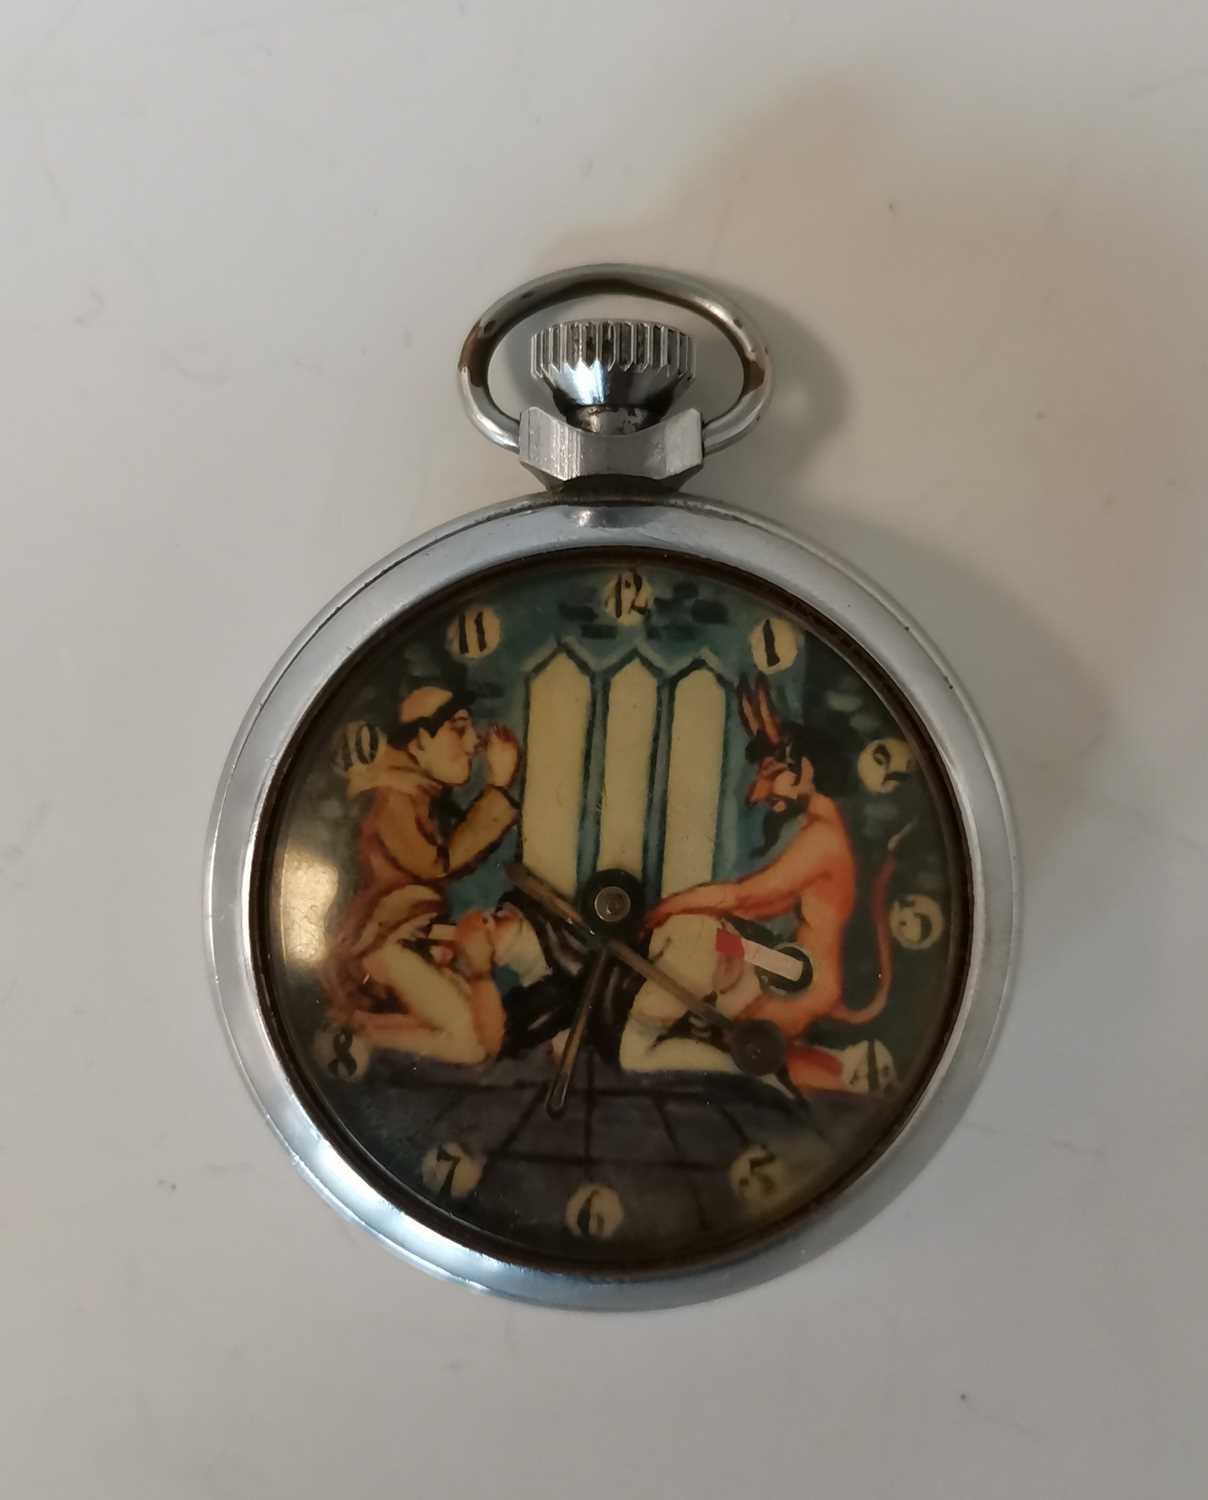 Lot 21 - An erotic Devil, Nun and Monk pocket watch